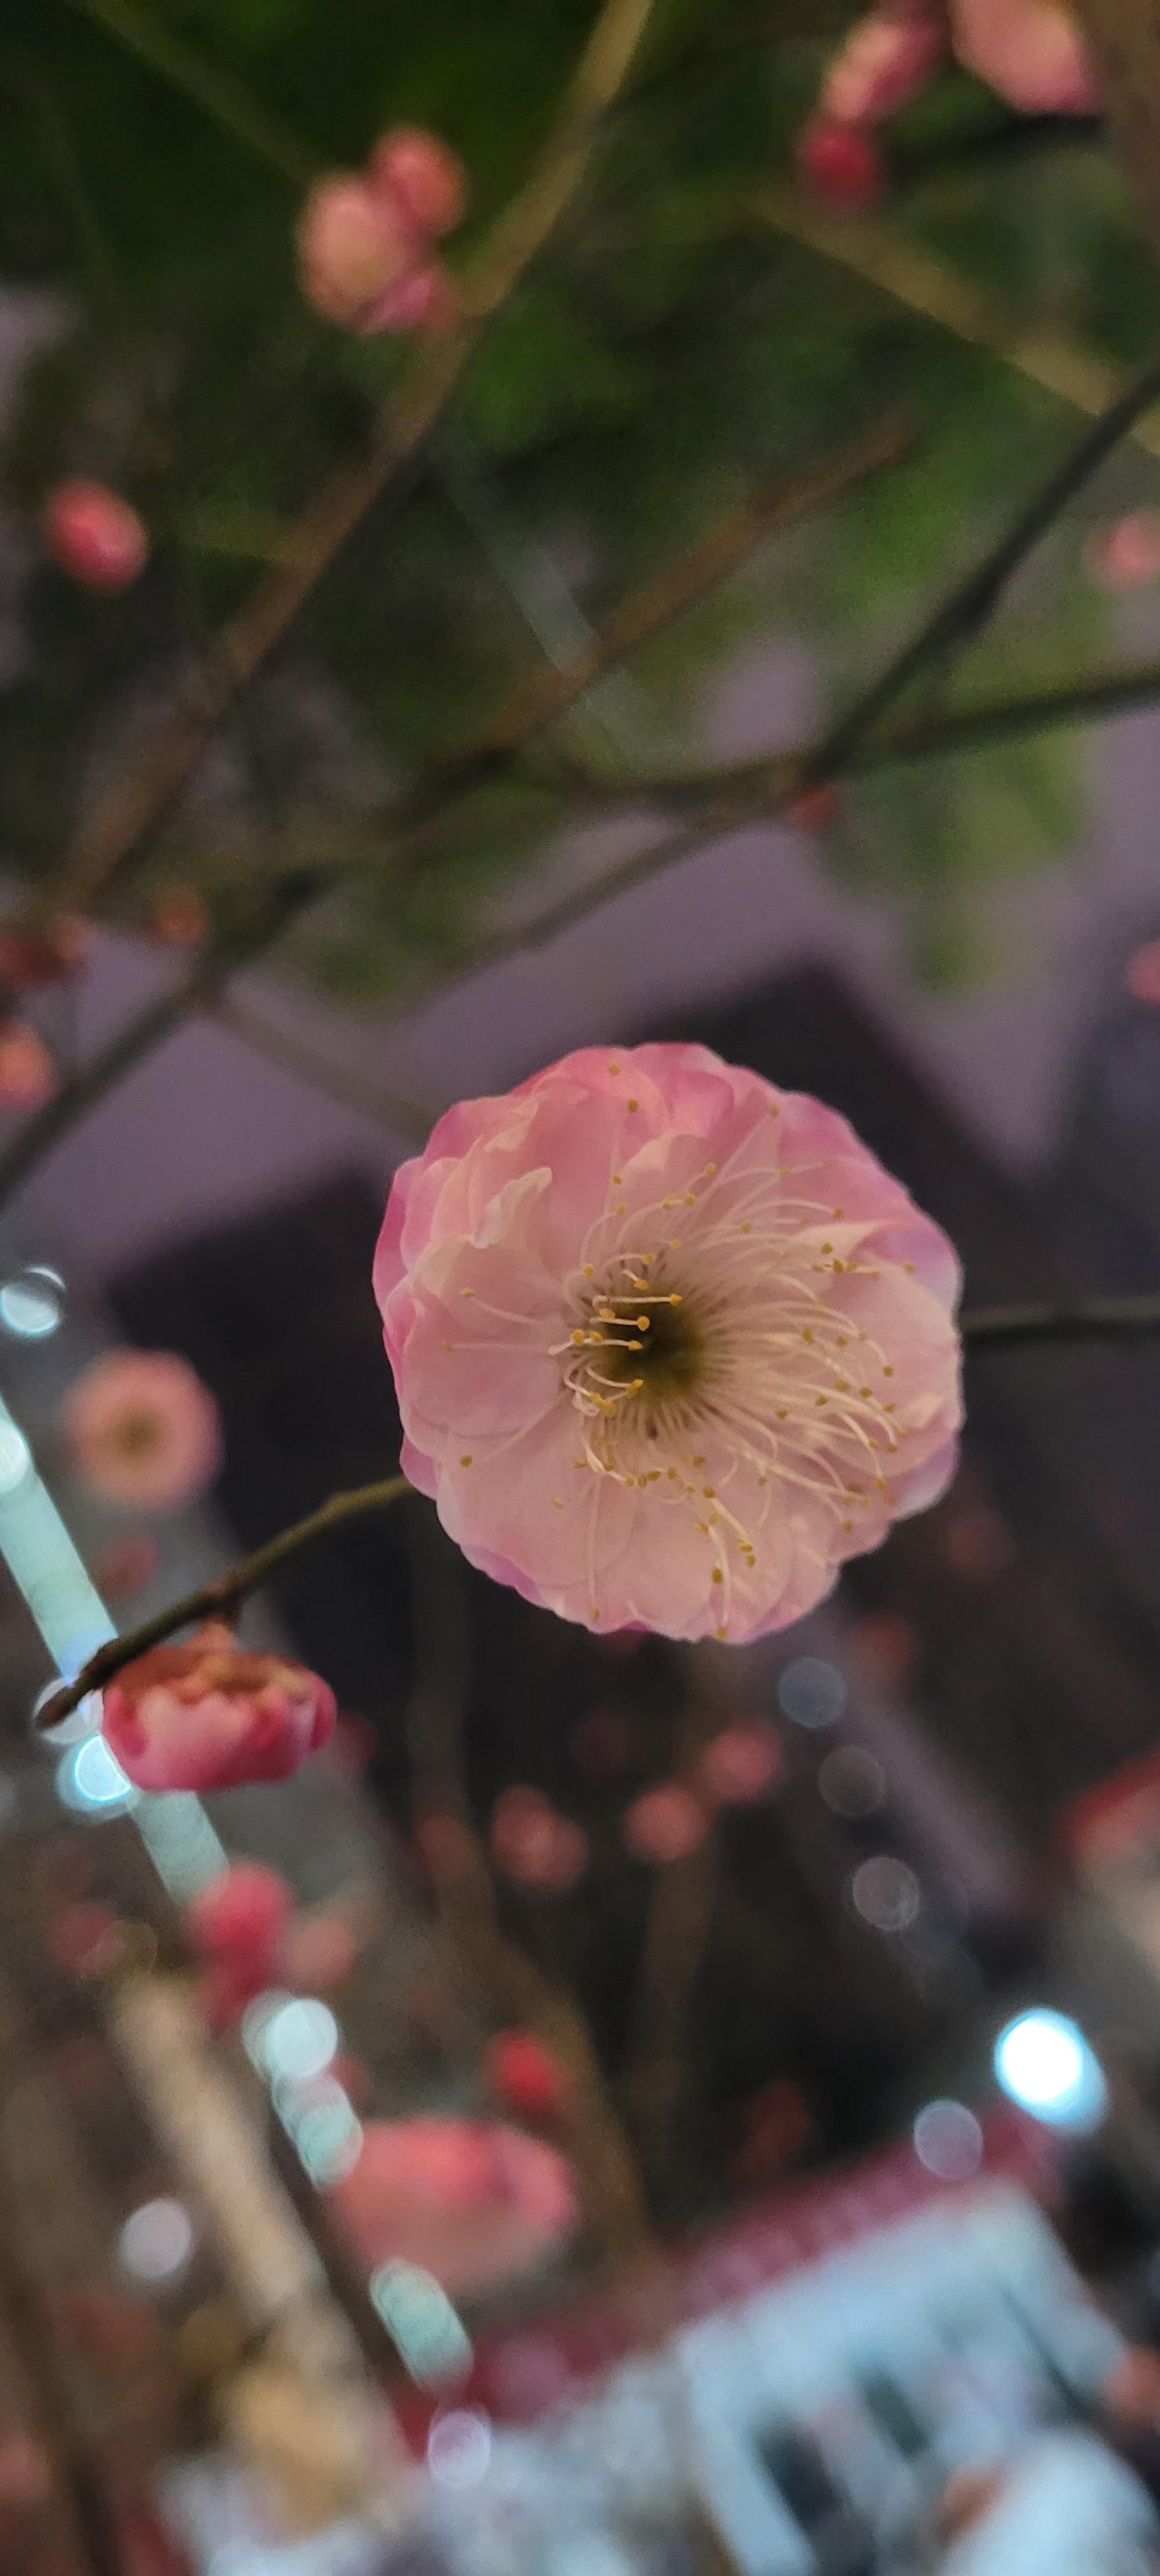 I posted it on Dodo, international friends call it Japanese quince